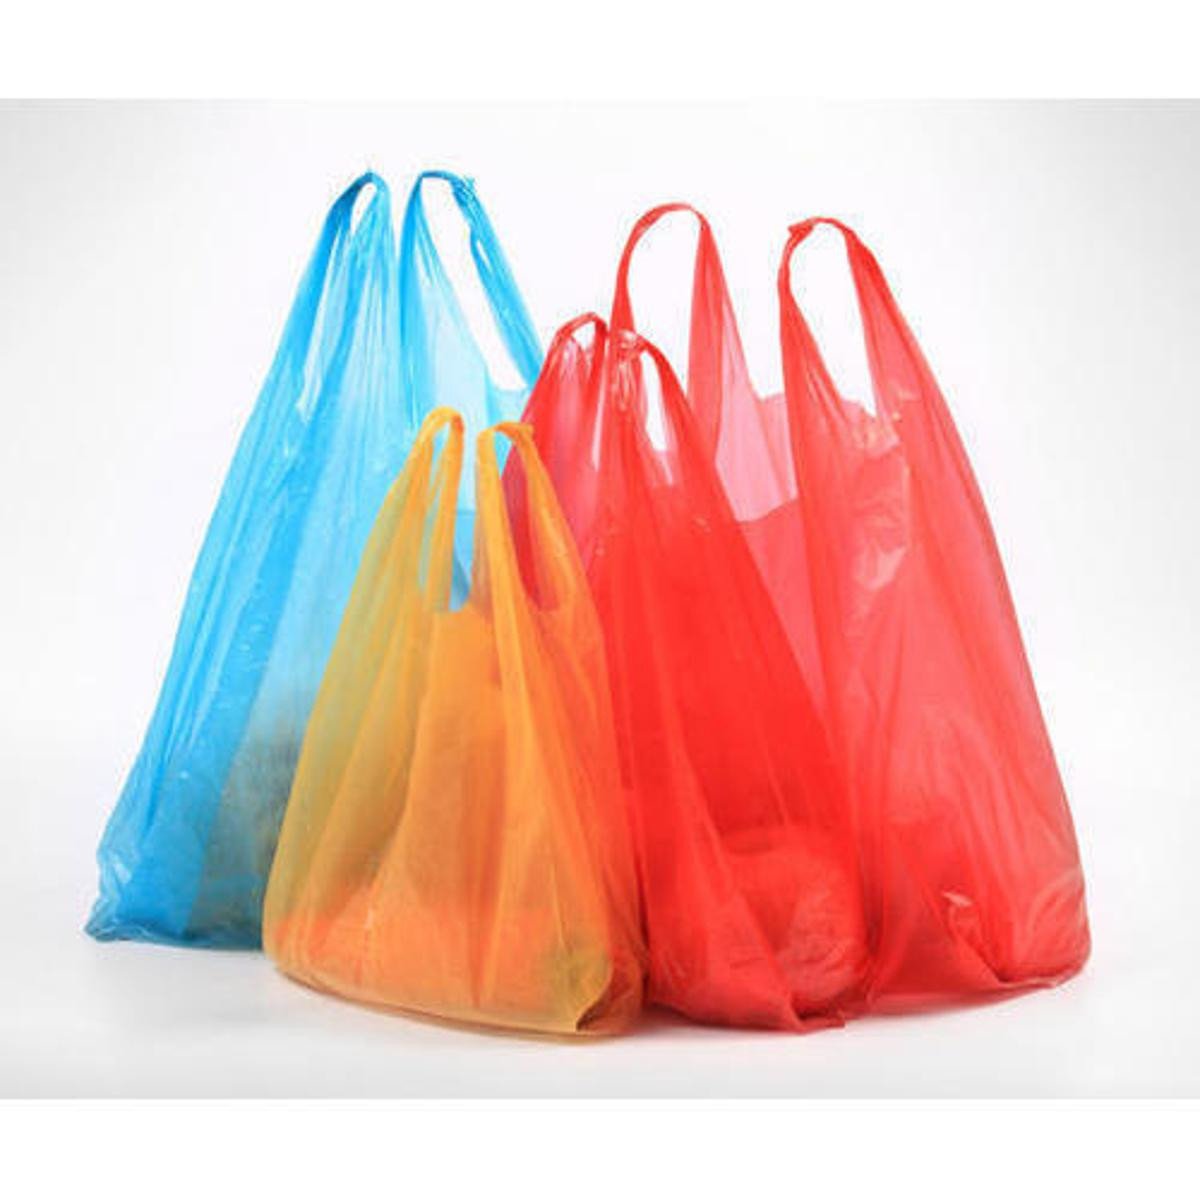 Pack of 100 - red colorful Plastic Shoppers for Shopping size 12x15 weight capacity 2 Kilo gram